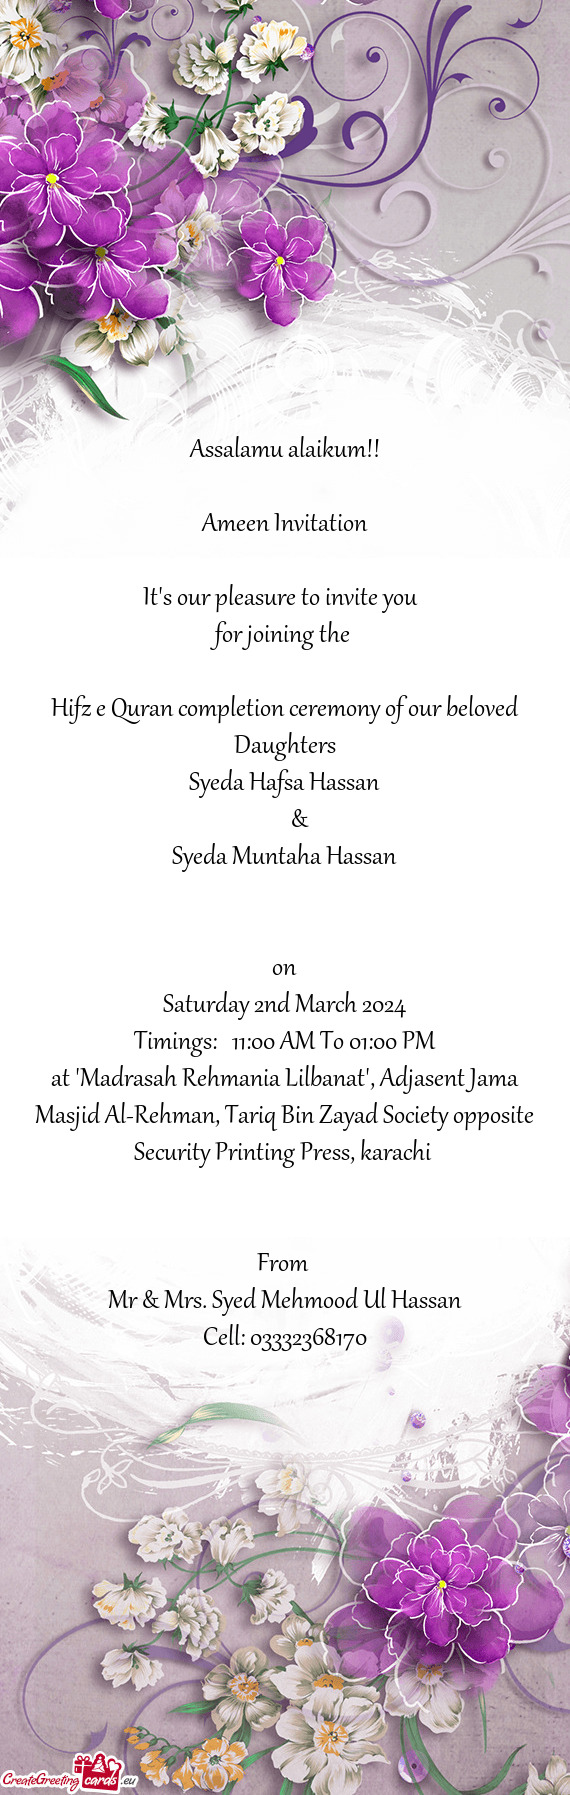 Hifz e Quran completion ceremony of our beloved Daughters